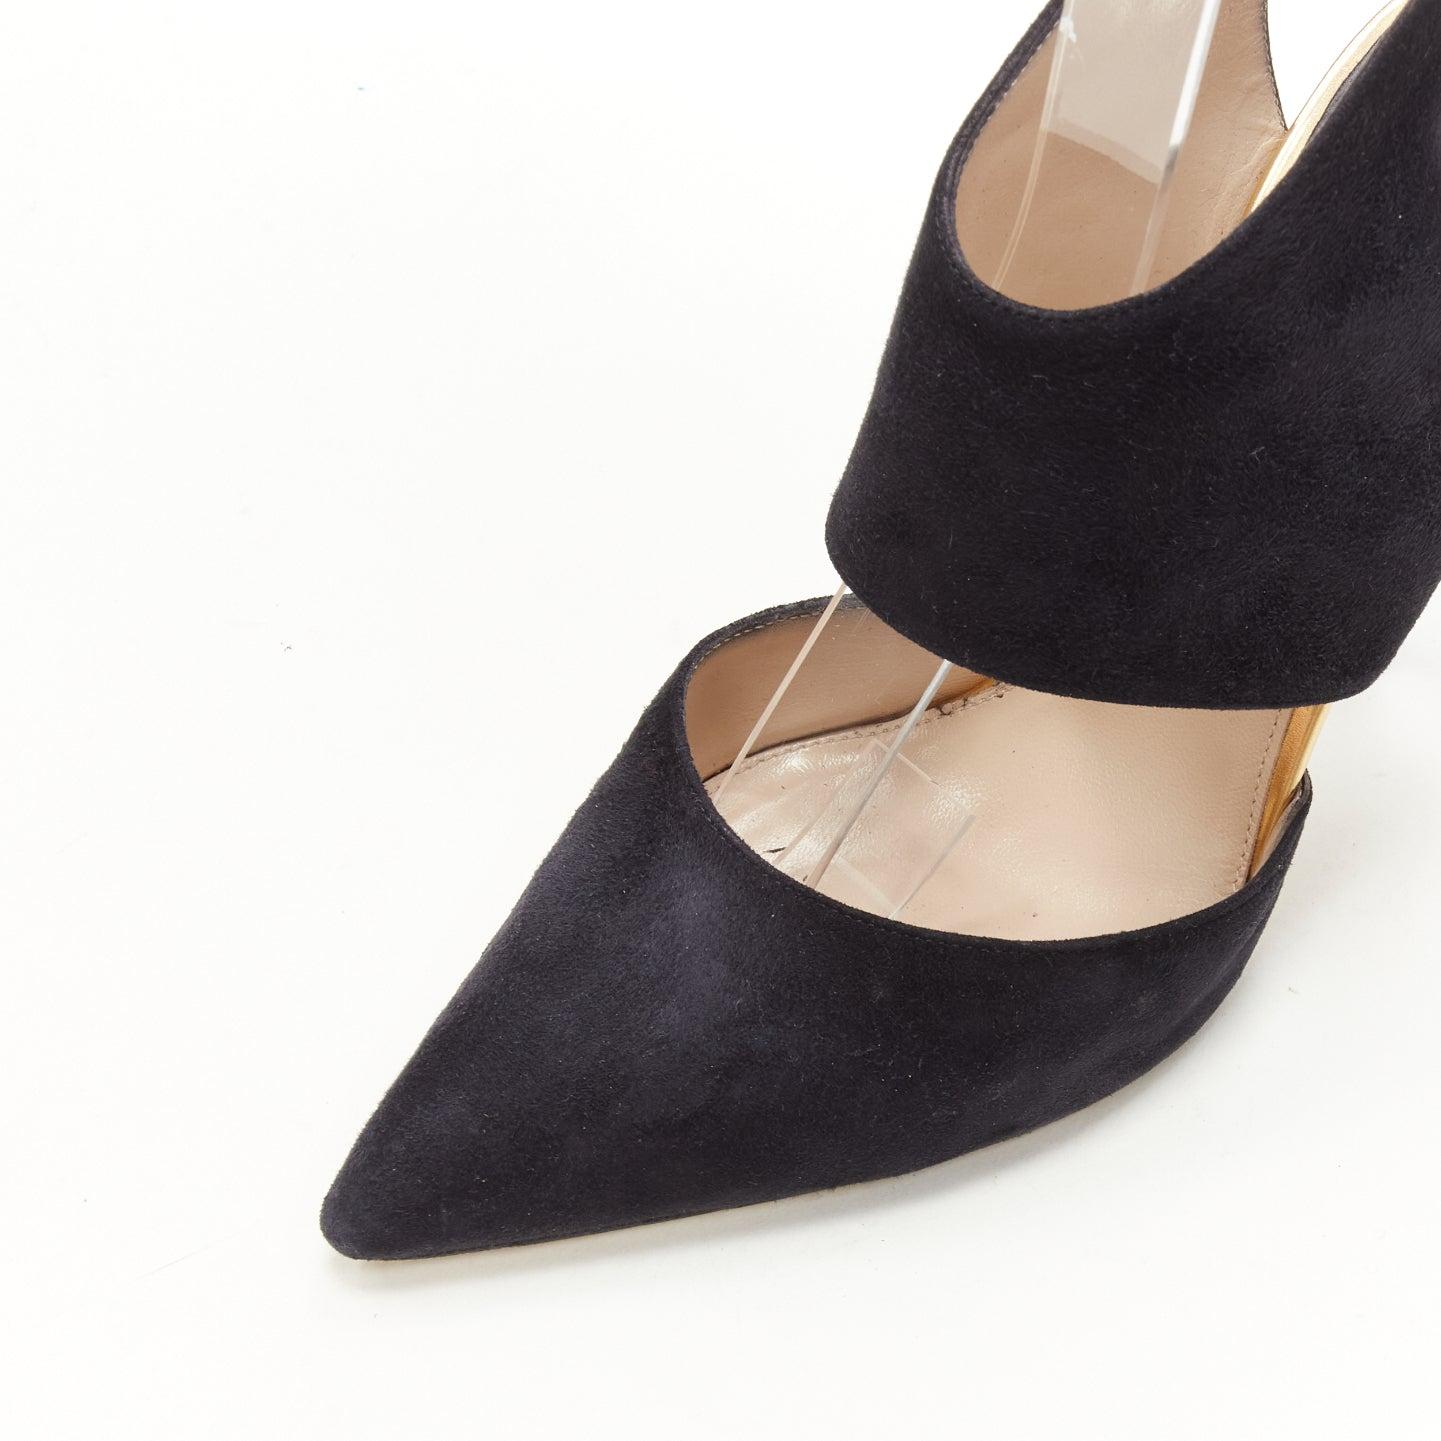 PAUL ANDREW black suede pointed winged dorsay pump EU38.5 For Sale 5